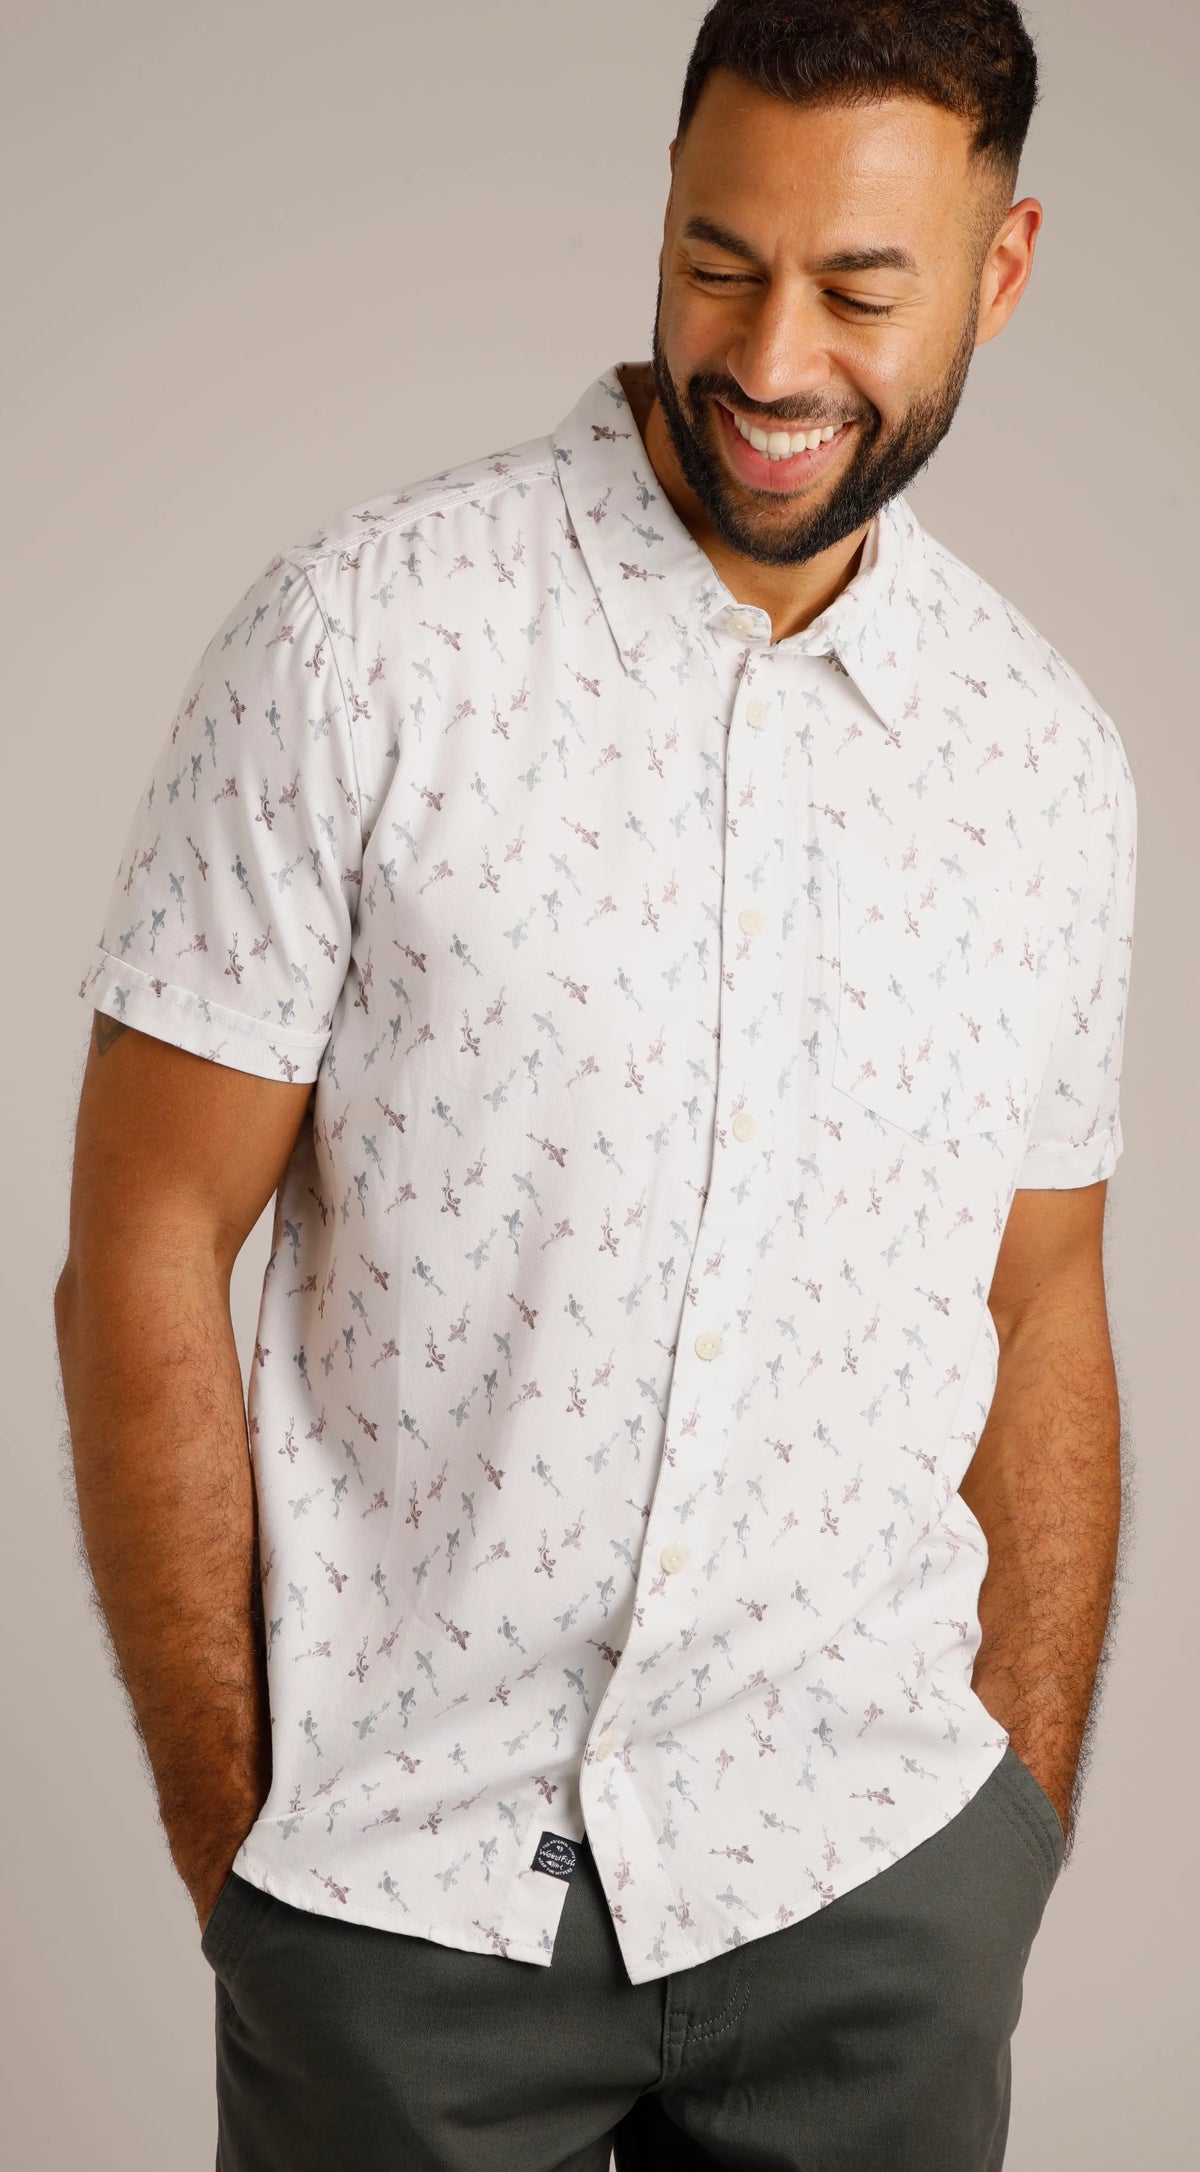 Keilor men's short sleeve shirt from Weird Fish in white with a fish pattern.